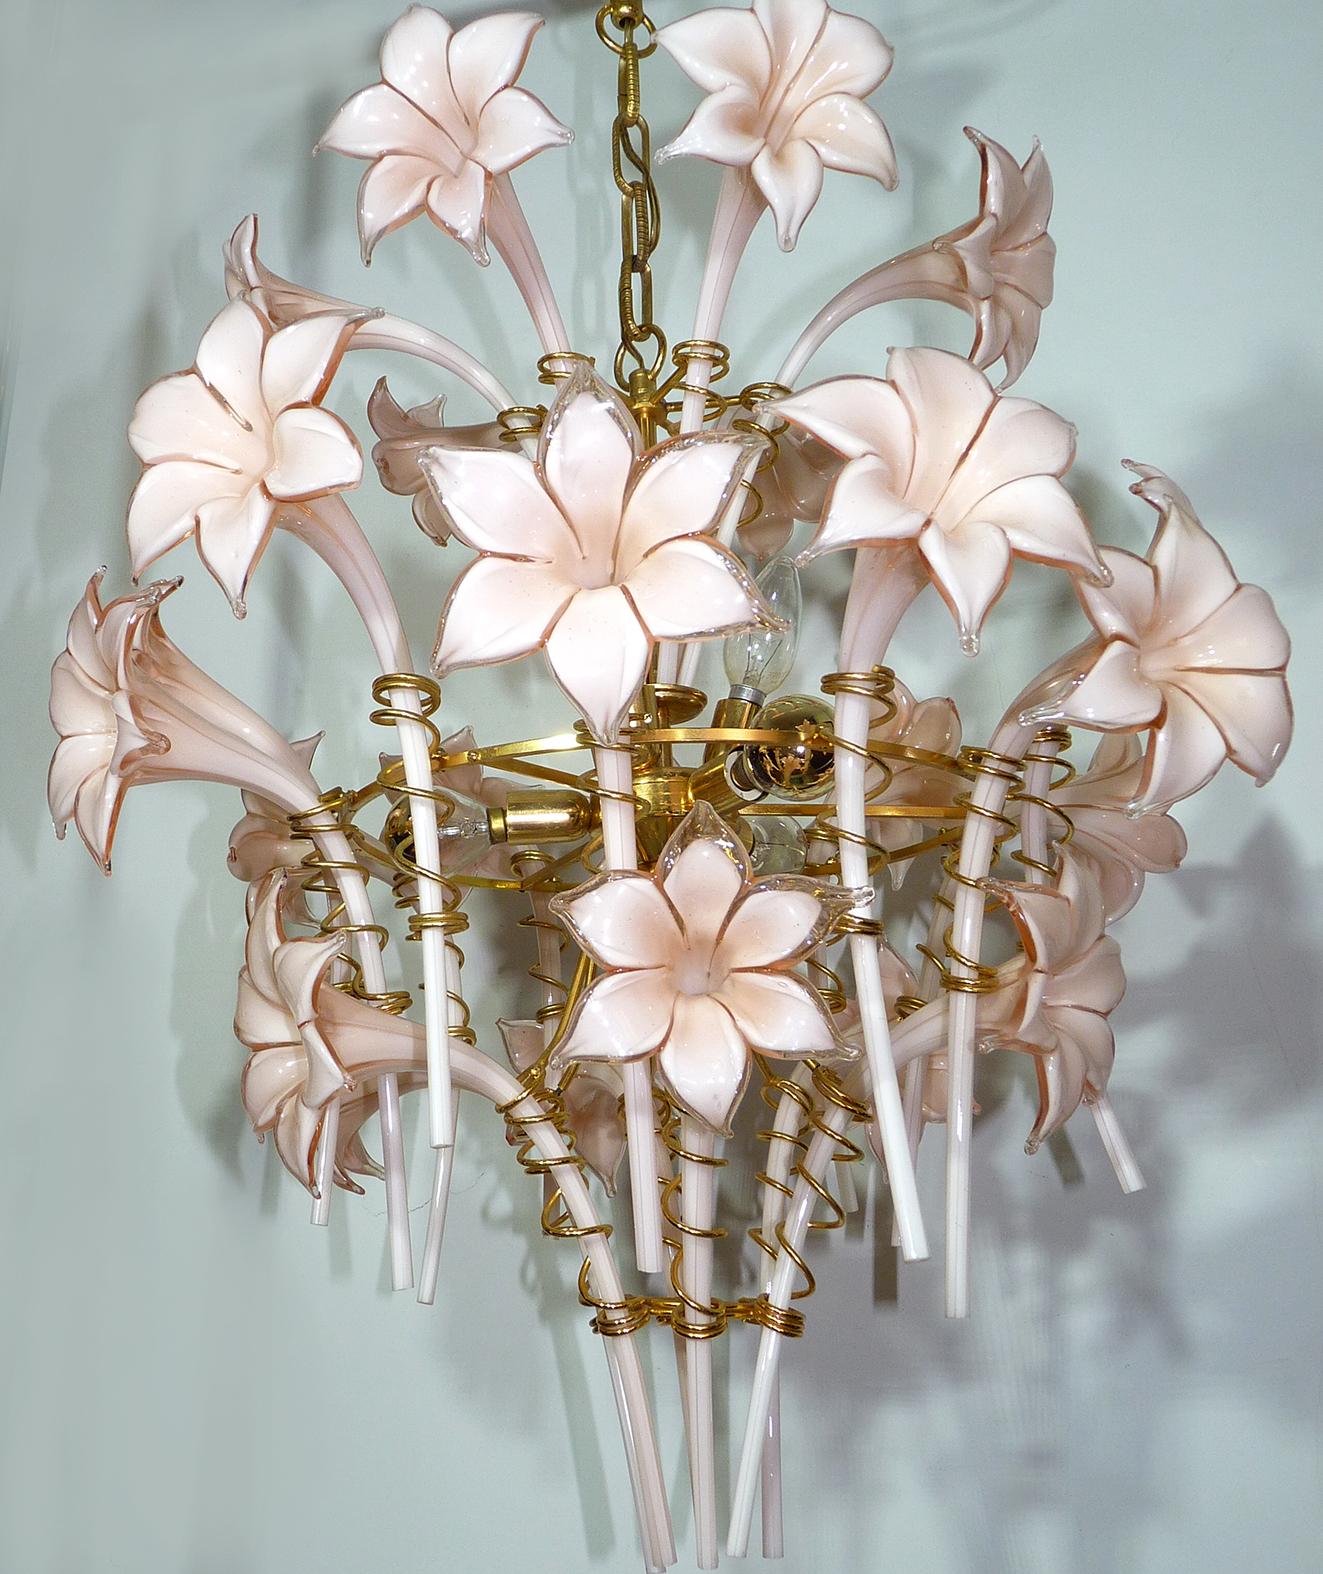 Awesome large 1970s vintage Floral Franco Luce Seguso gilt chandelier, of Murano glass, having a frame of brass,
it's spherical center holding twenty-four, hand blown, blooms in the form of lilies and gold-plated brass.
Measures:
Diameter 23.6 in/